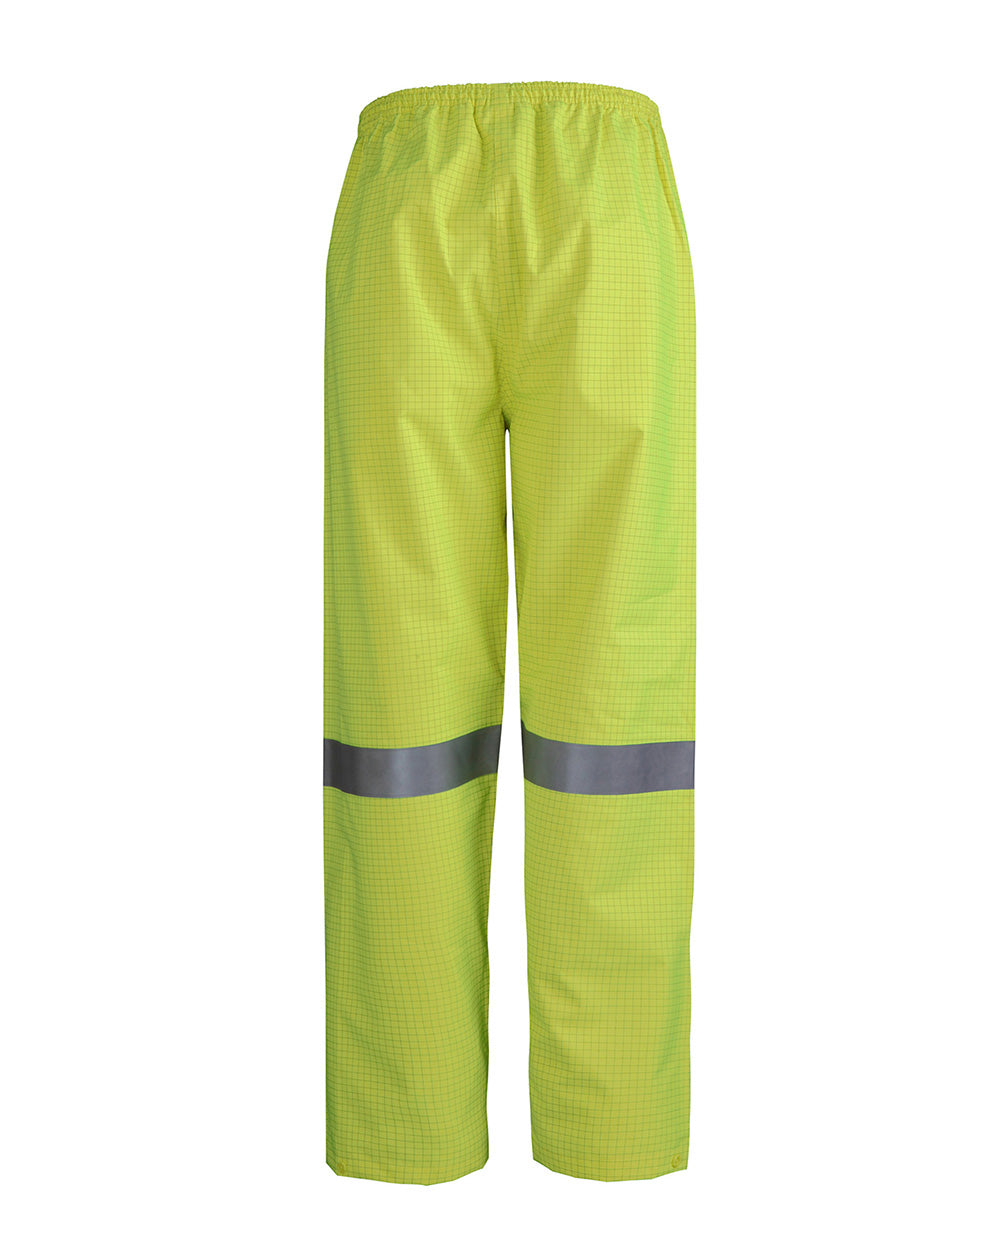 Barrier Pant in Fluoro Yellow